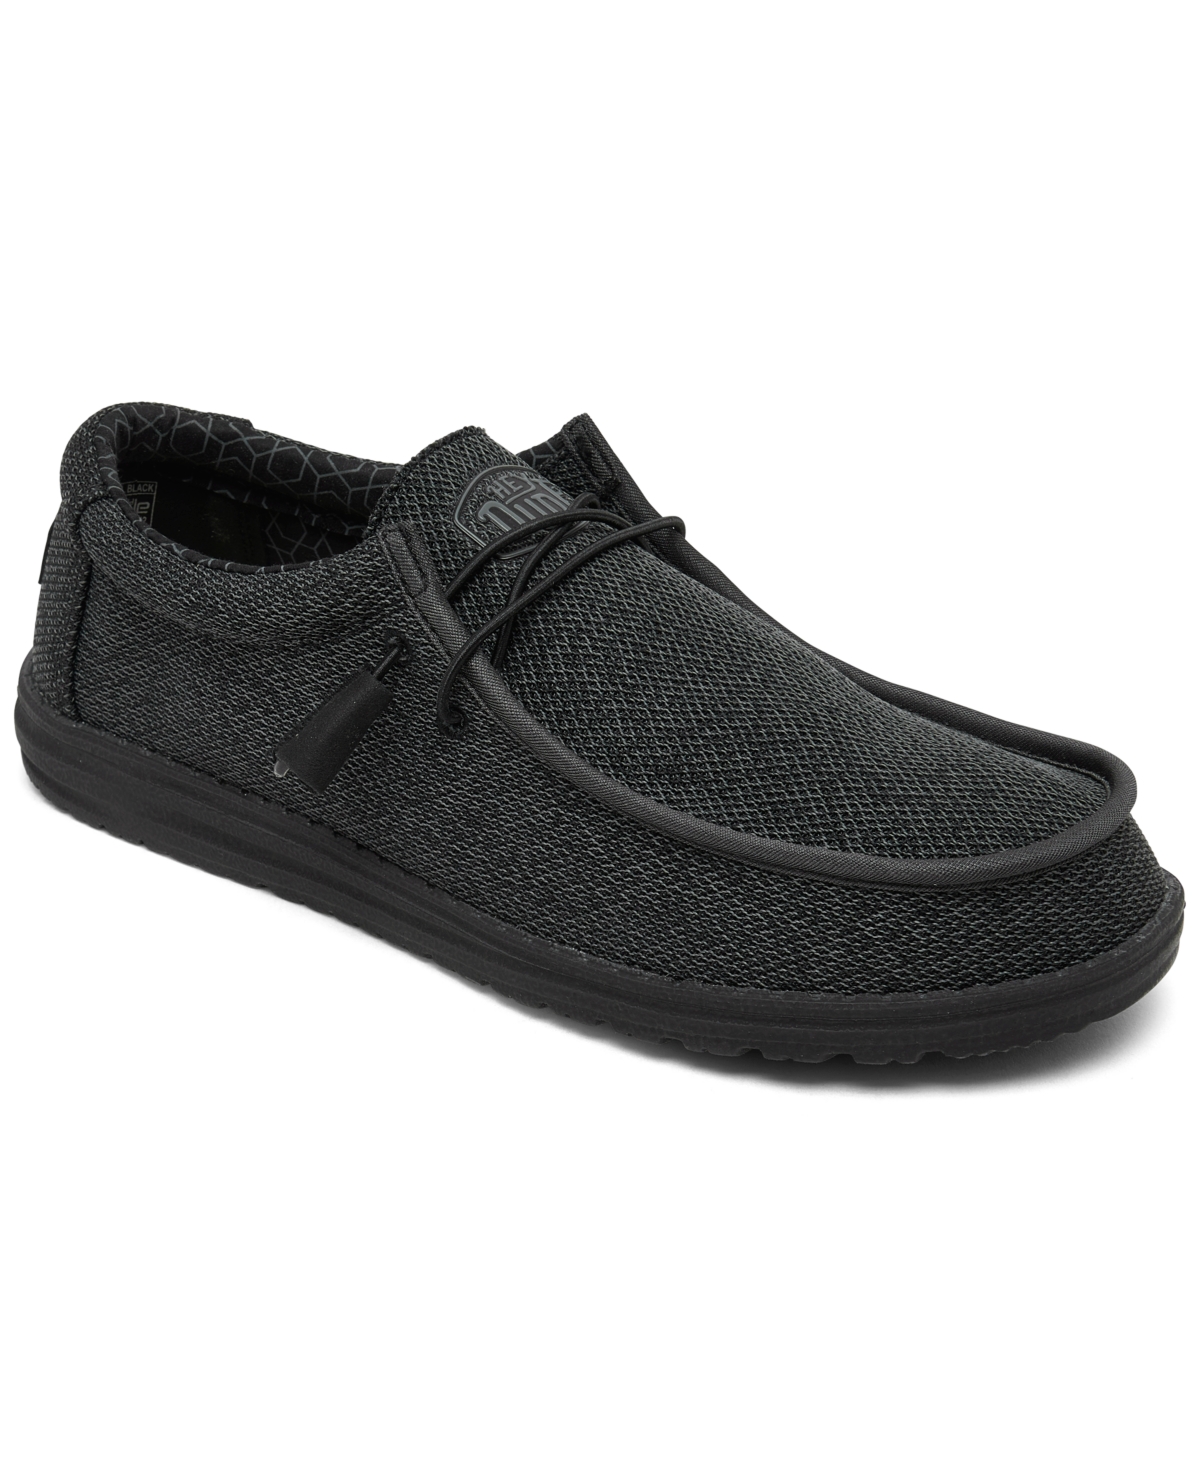 Men's Wally Sox Slip-On Casual Moccasin Sneakers from Finish Line - Black